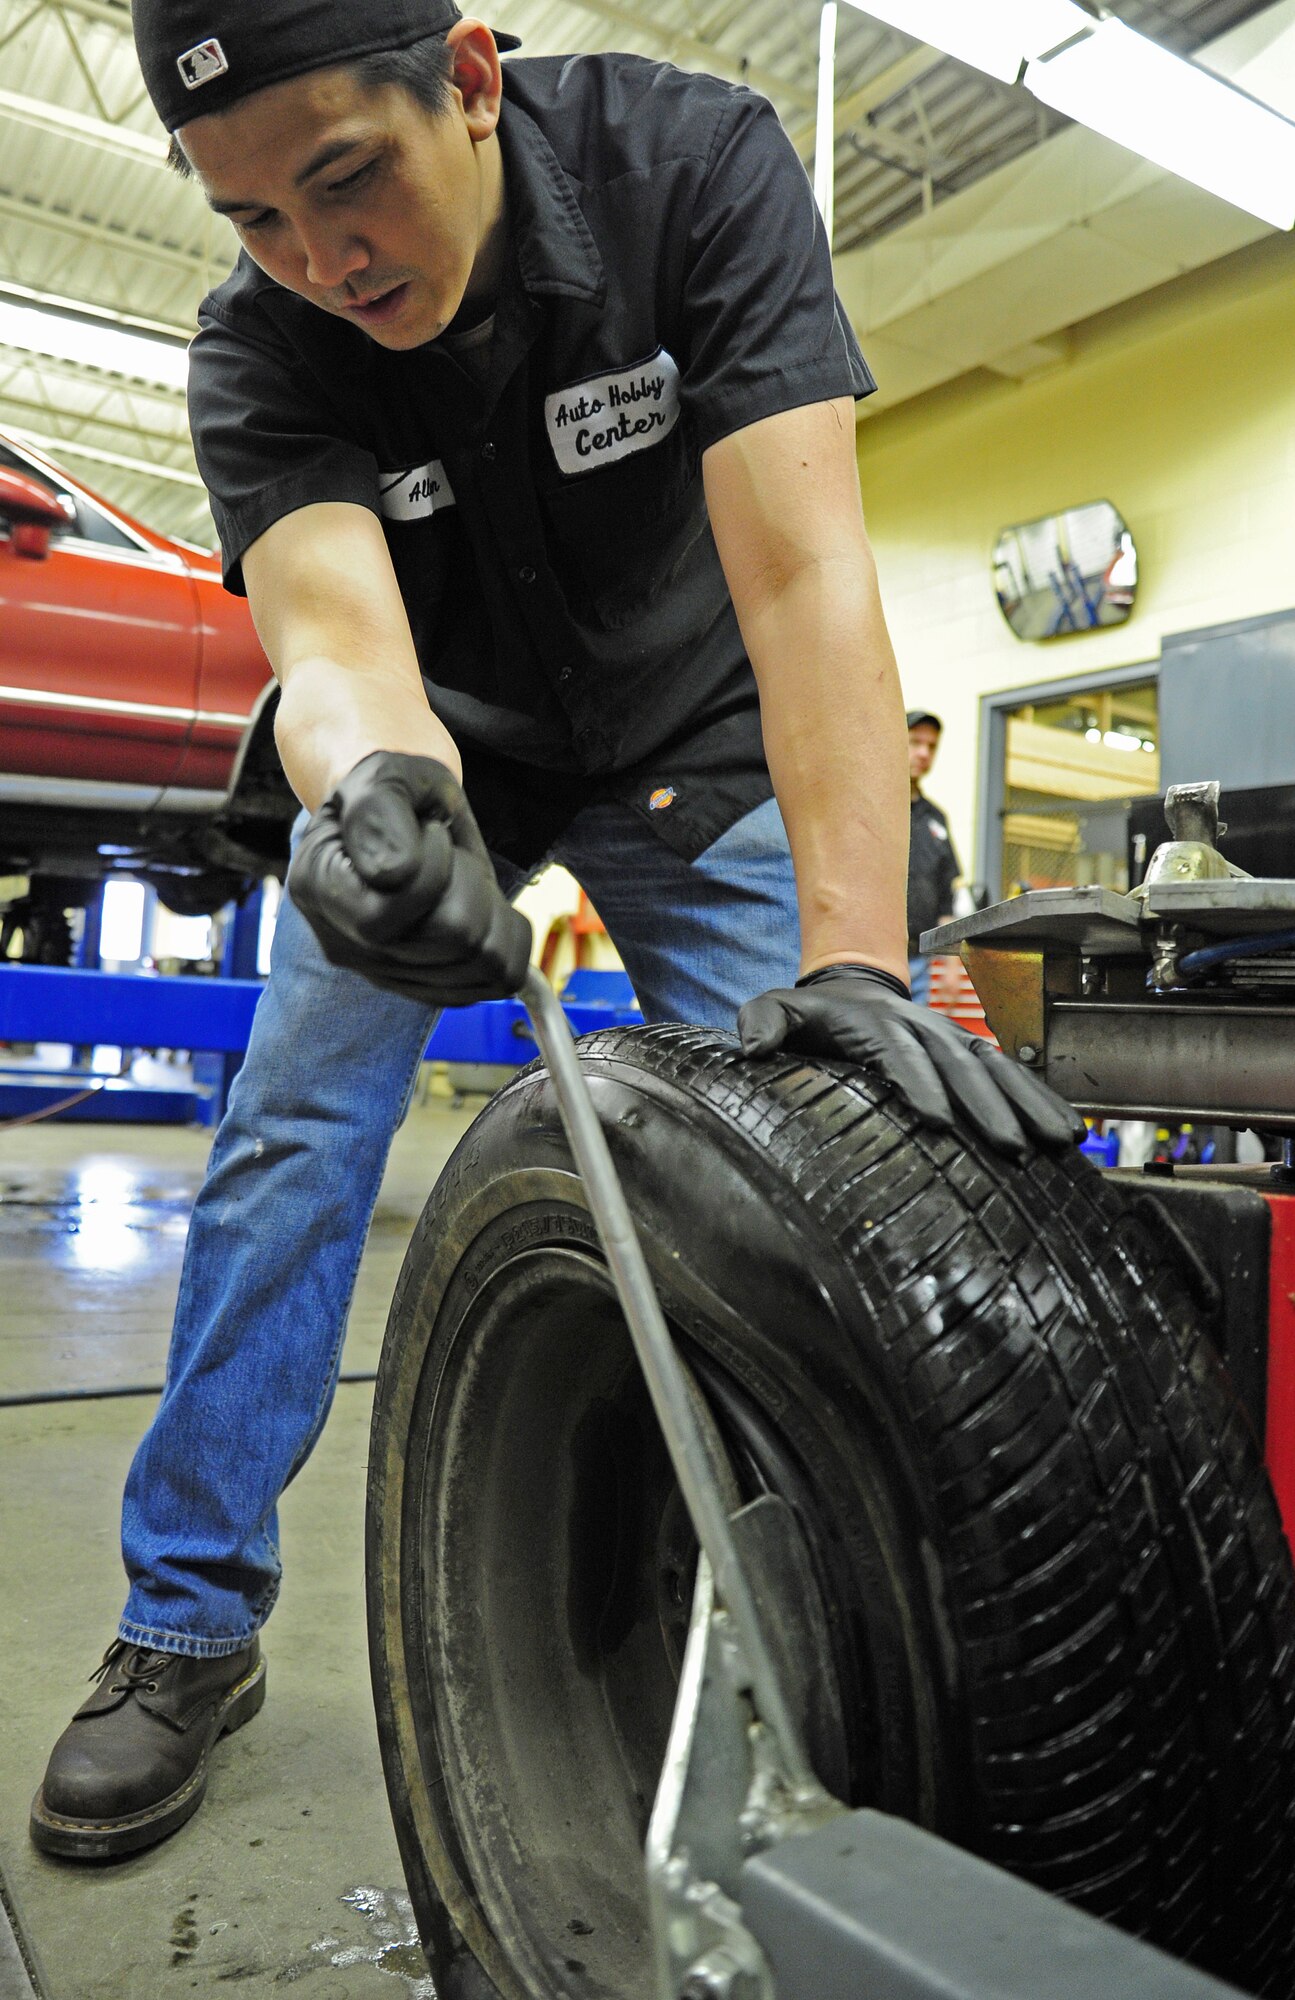 Allen Aniciete, 92nd Force Support Squadron mechanic, removes a rim using a bead breaker machine at the auto hobby shop on Fairchild Air Force Base, Wash., Jan. 18, 2013. Allen has worked at the auto shop for two years. (U.S. Air Force photo by Airman 1st Class Janelle Patiño)